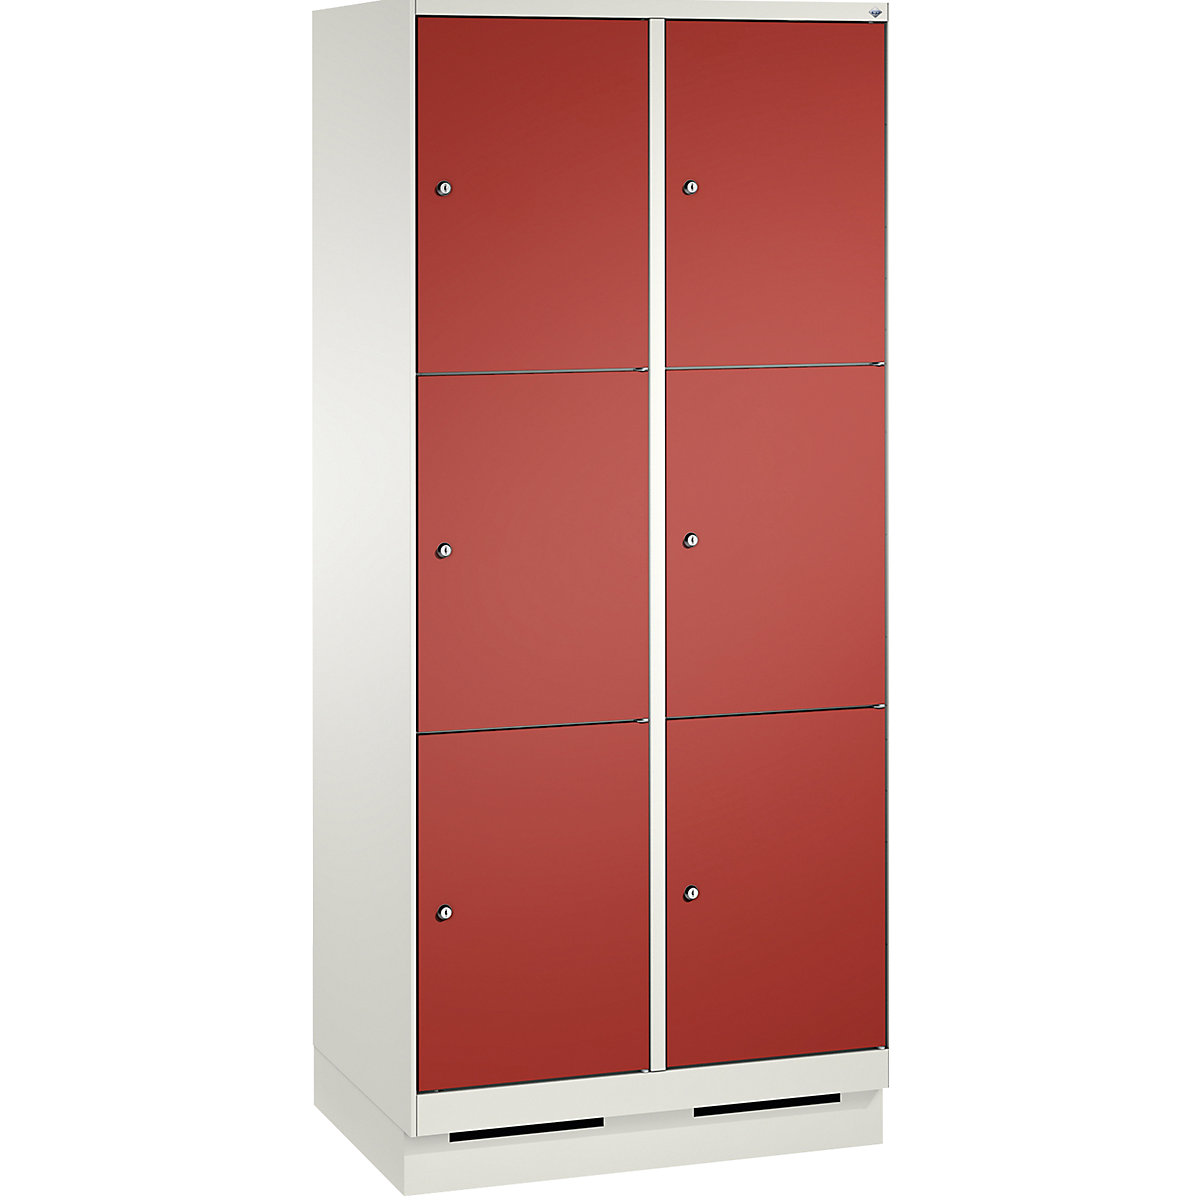 EVOLO locker unit, with plinth – C+P, 2 compartments, 3 shelf compartments each, compartment width 400 mm, traffic white / flame red-8